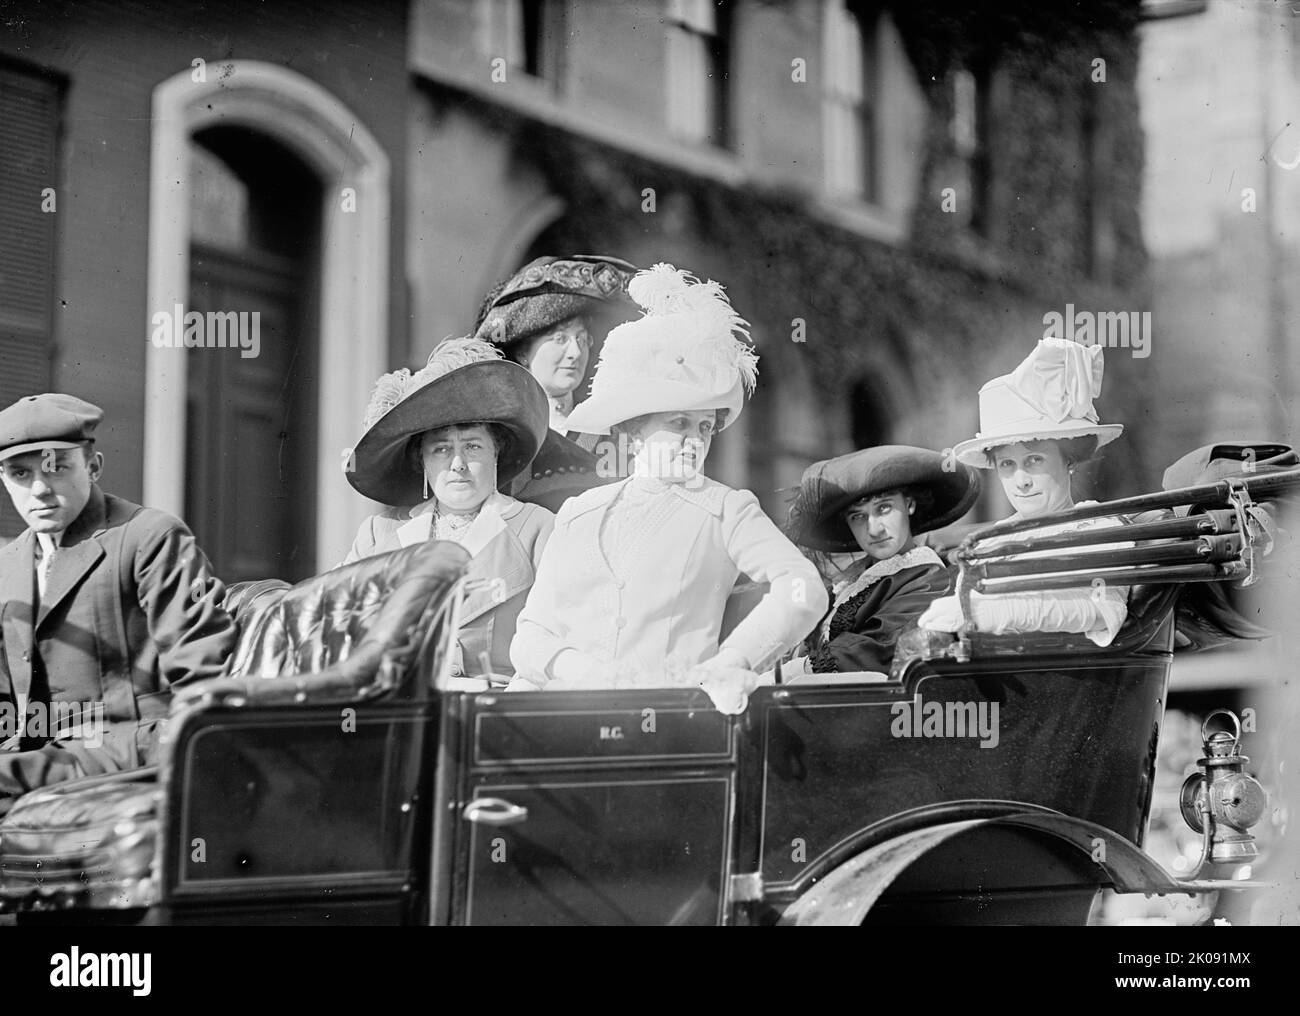 Democratic National Convention - Mrs. Norman E. Mack; Mrs. A.J. Daly of Alaska; Mrs. Thomas Taggart; Miss Mccartney; Mrs. Robert Crain, 1912. [Harriet T. Mack was the wife of editor and publisher Norman E. Mack; Eva Bryant Taggart was married to politician Thomas Taggart]. Stock Photo